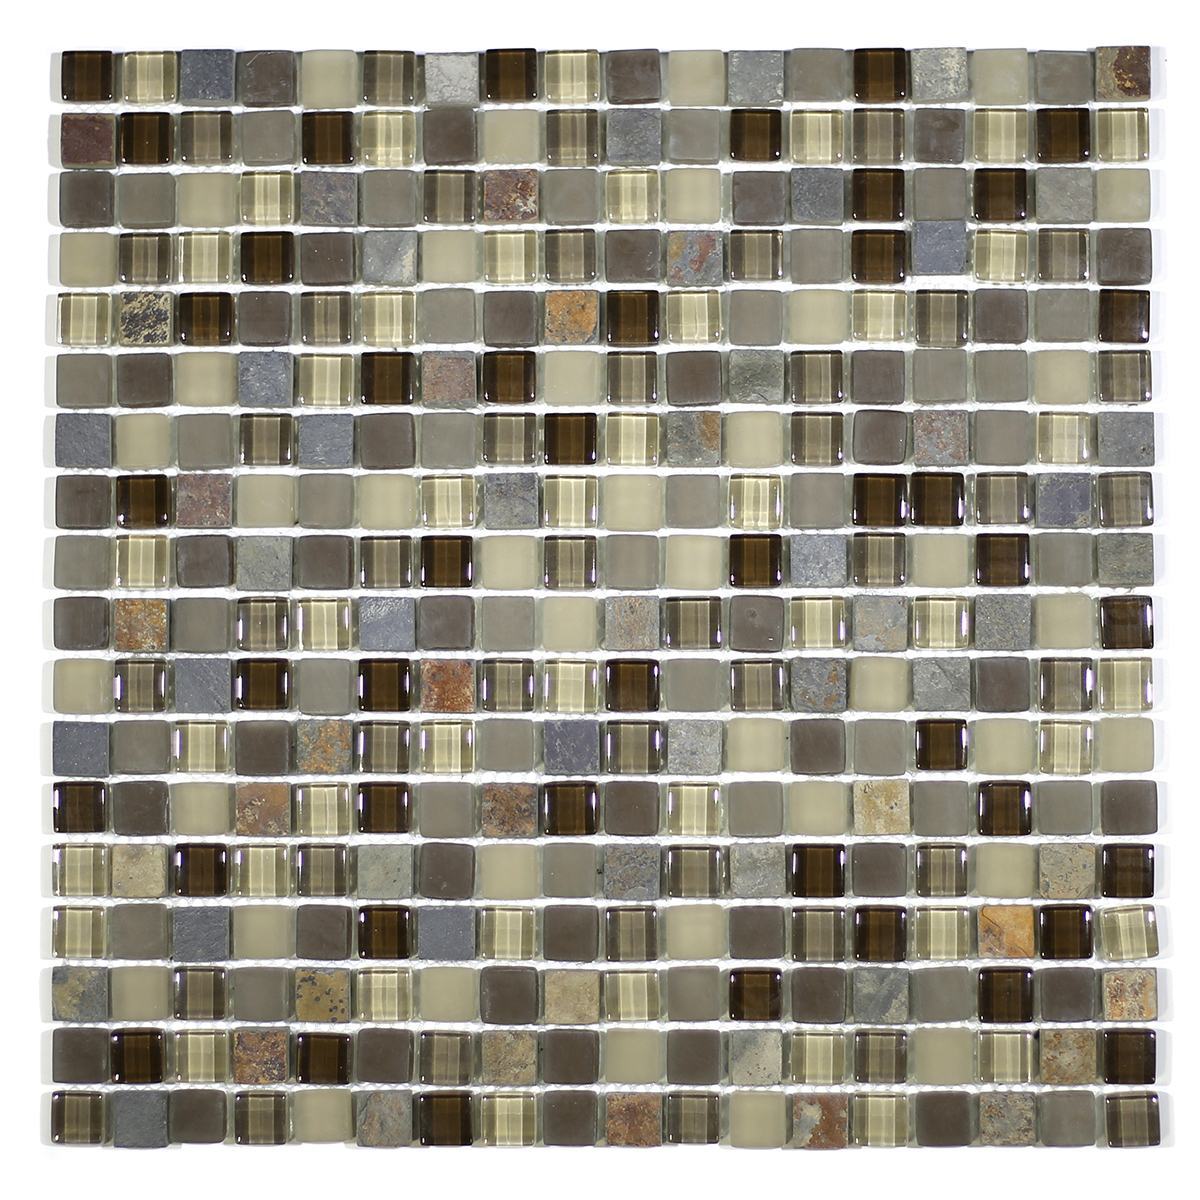 MA20-S  5/8" SQUARE GLASS AND STONE MOSAIC BLEND